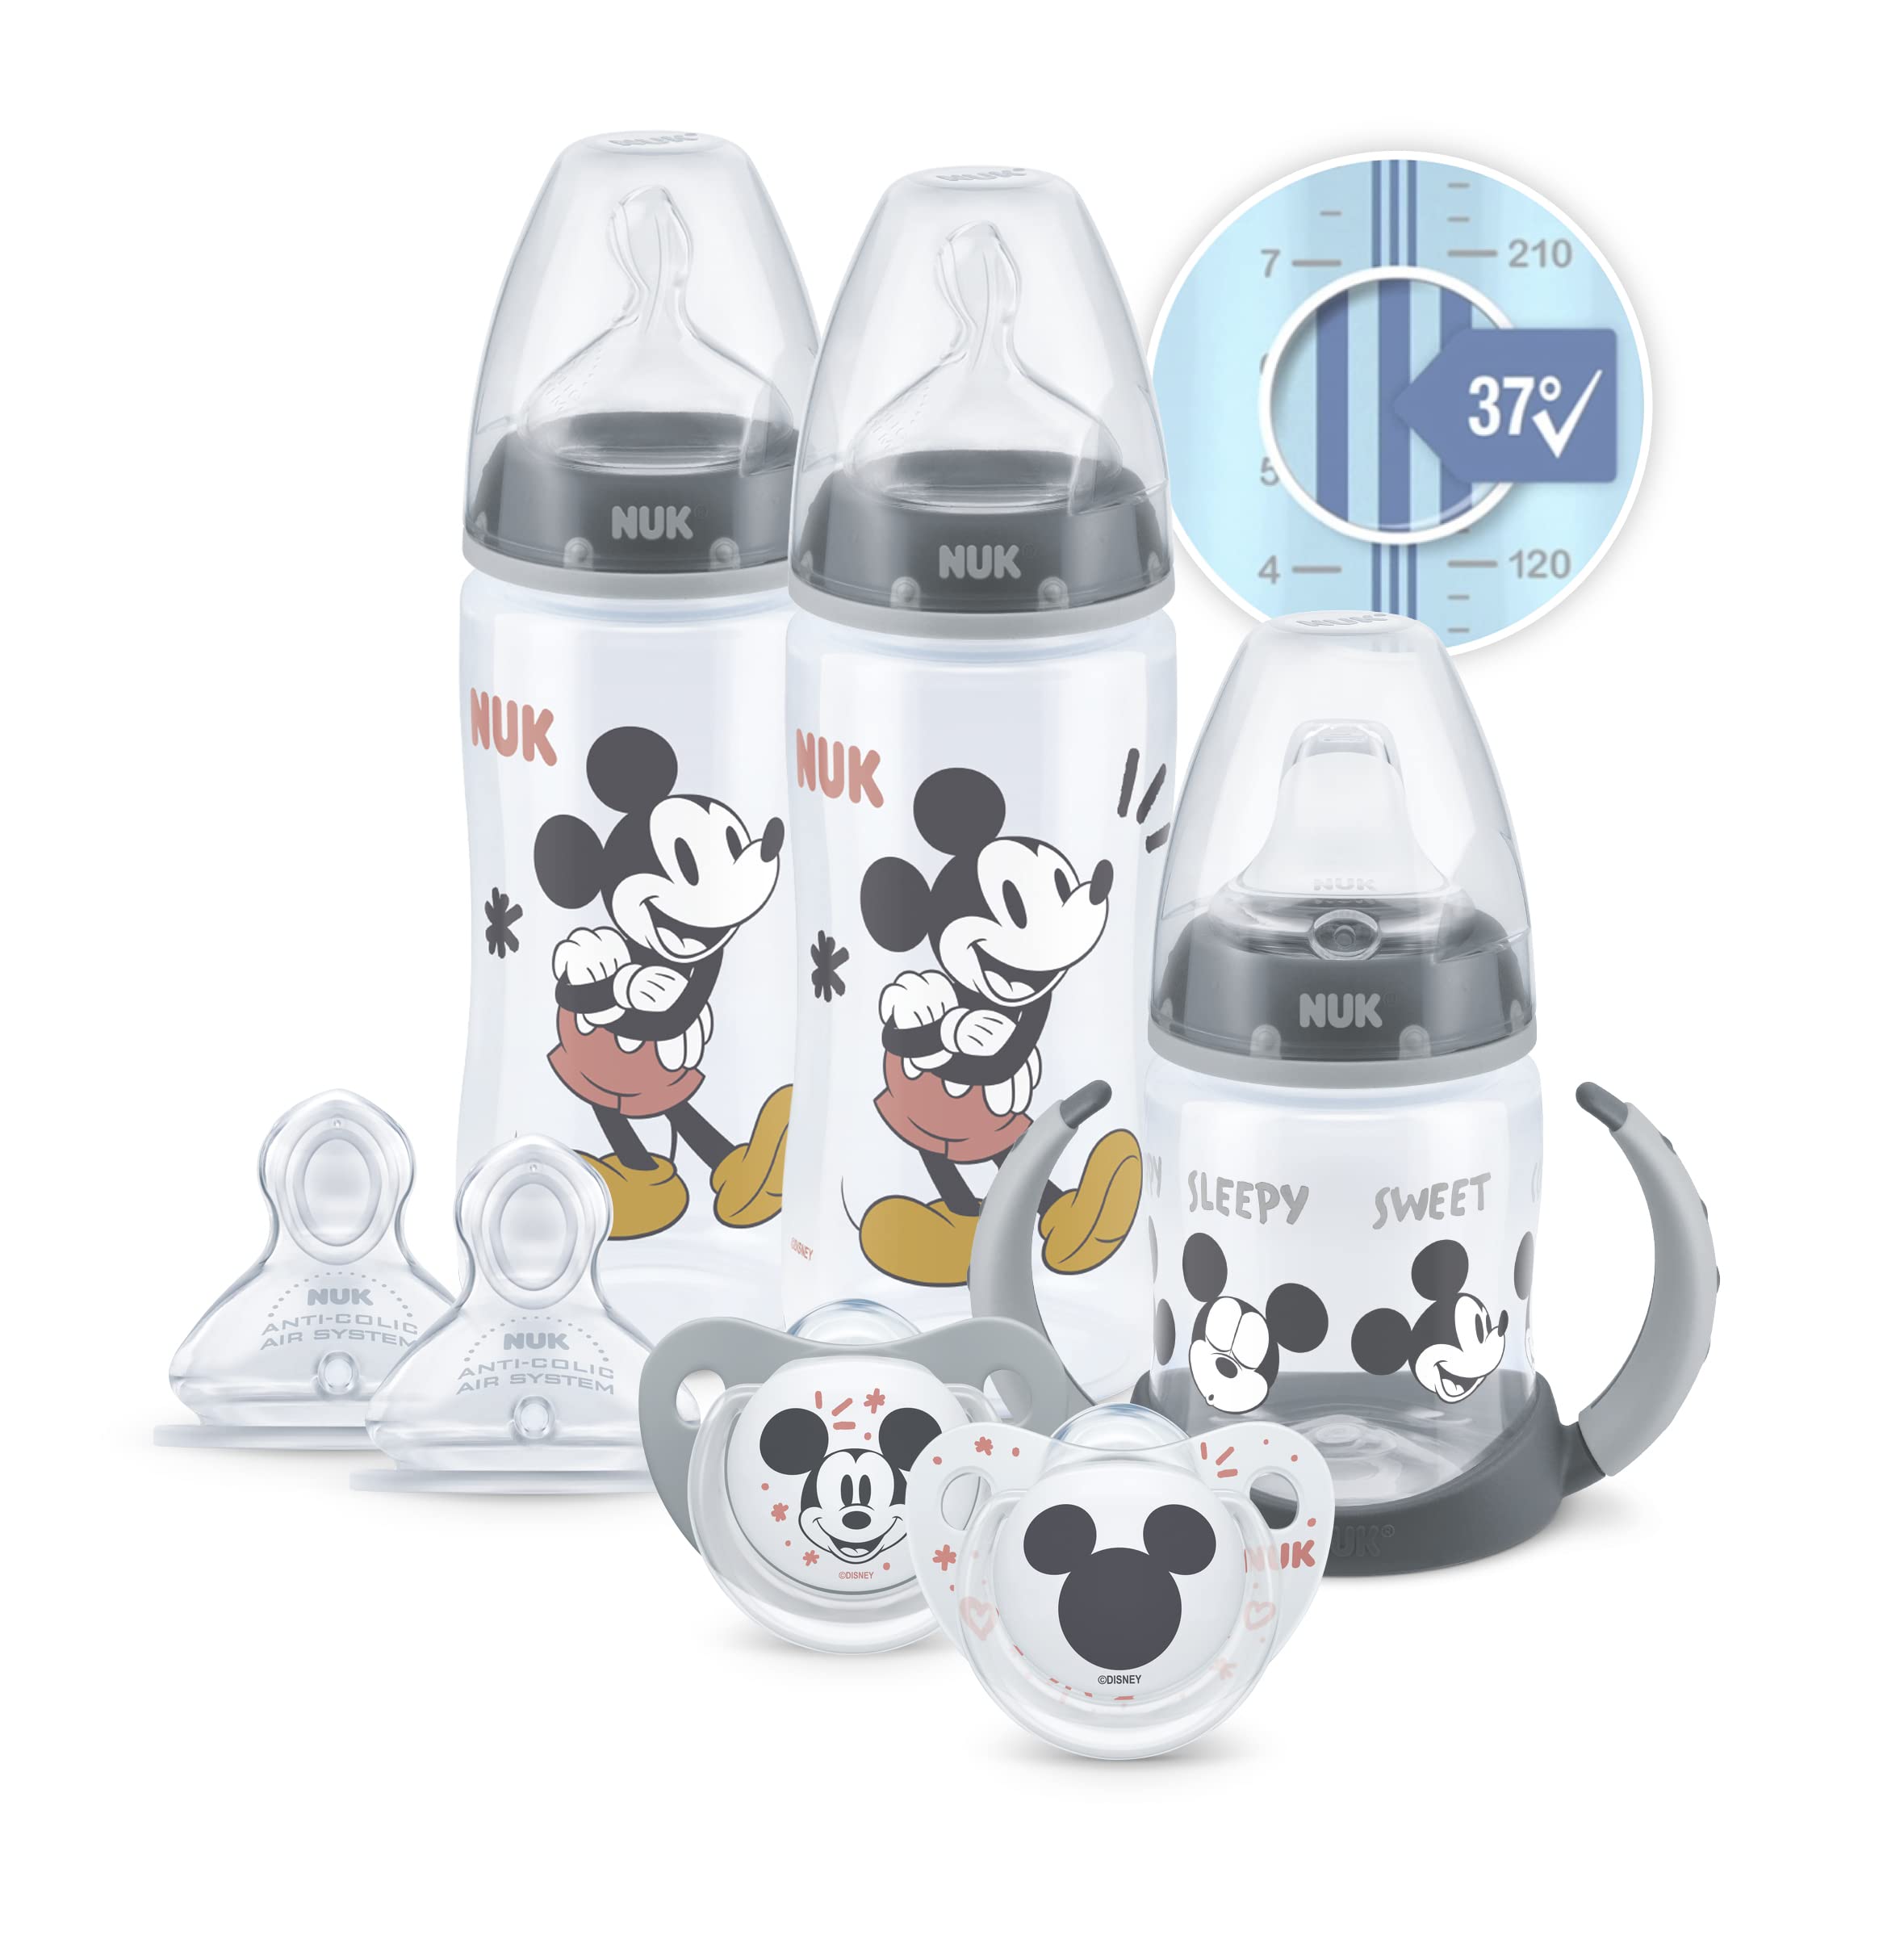 NUK Disney First Choice+ First Years Set | 6-18 Months | Temperature Control | 2 x 300 ml Bottles, 1 x Learner Cup, 2 x Soothers, 2 Teats | Anti-Colic Vent | BPA-Free | Mickey Mouse | 7 Count